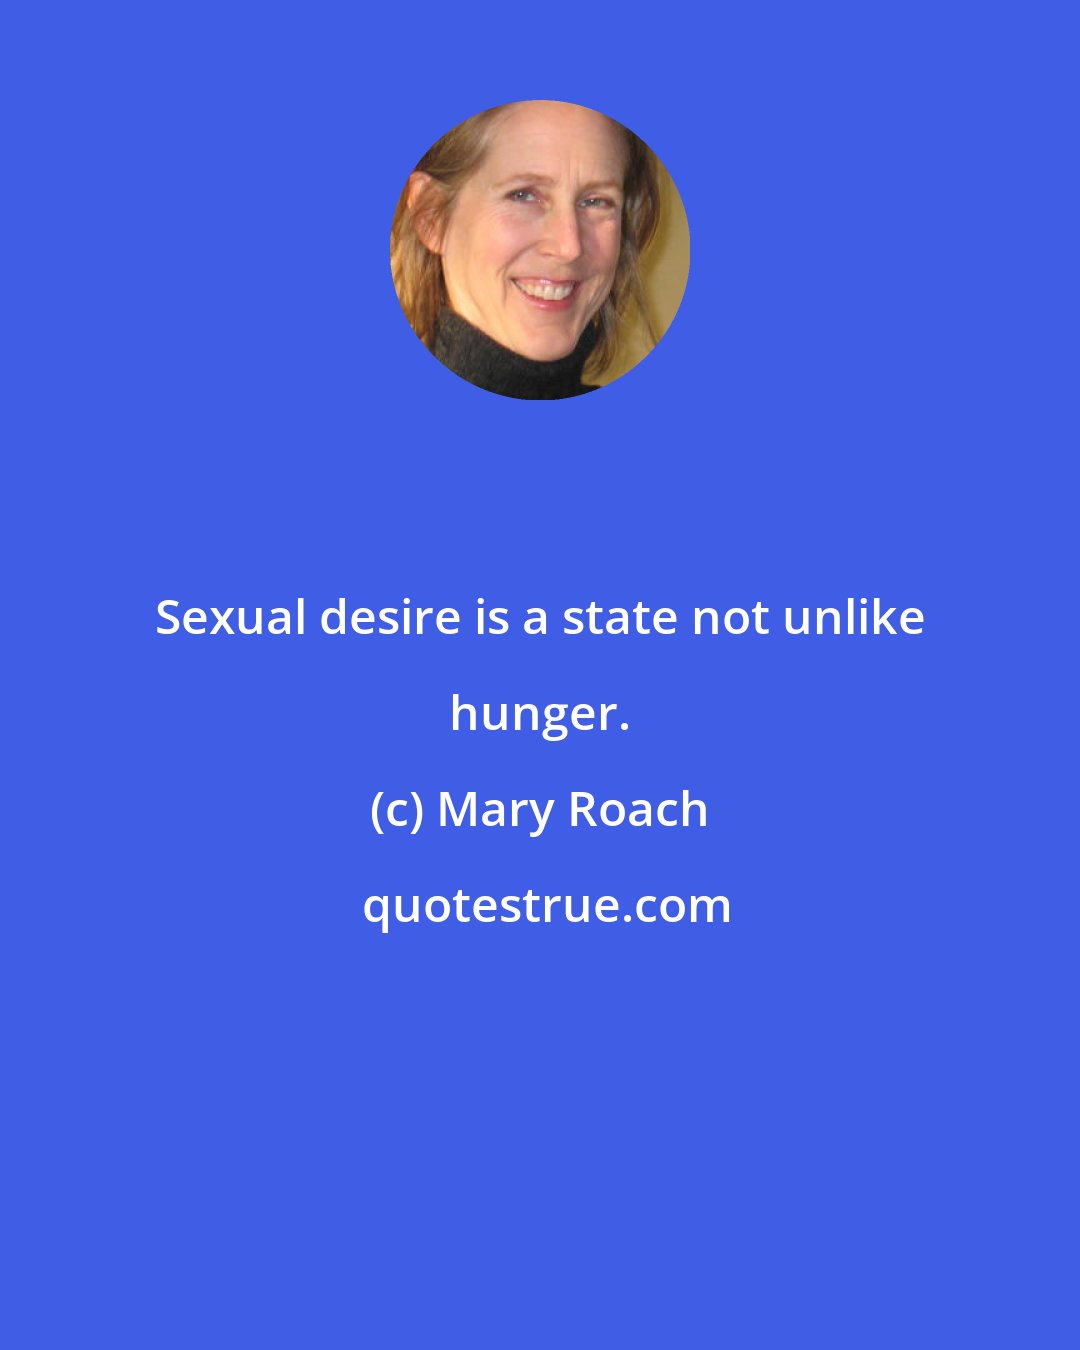 Mary Roach: Sexual desire is a state not unlike hunger.